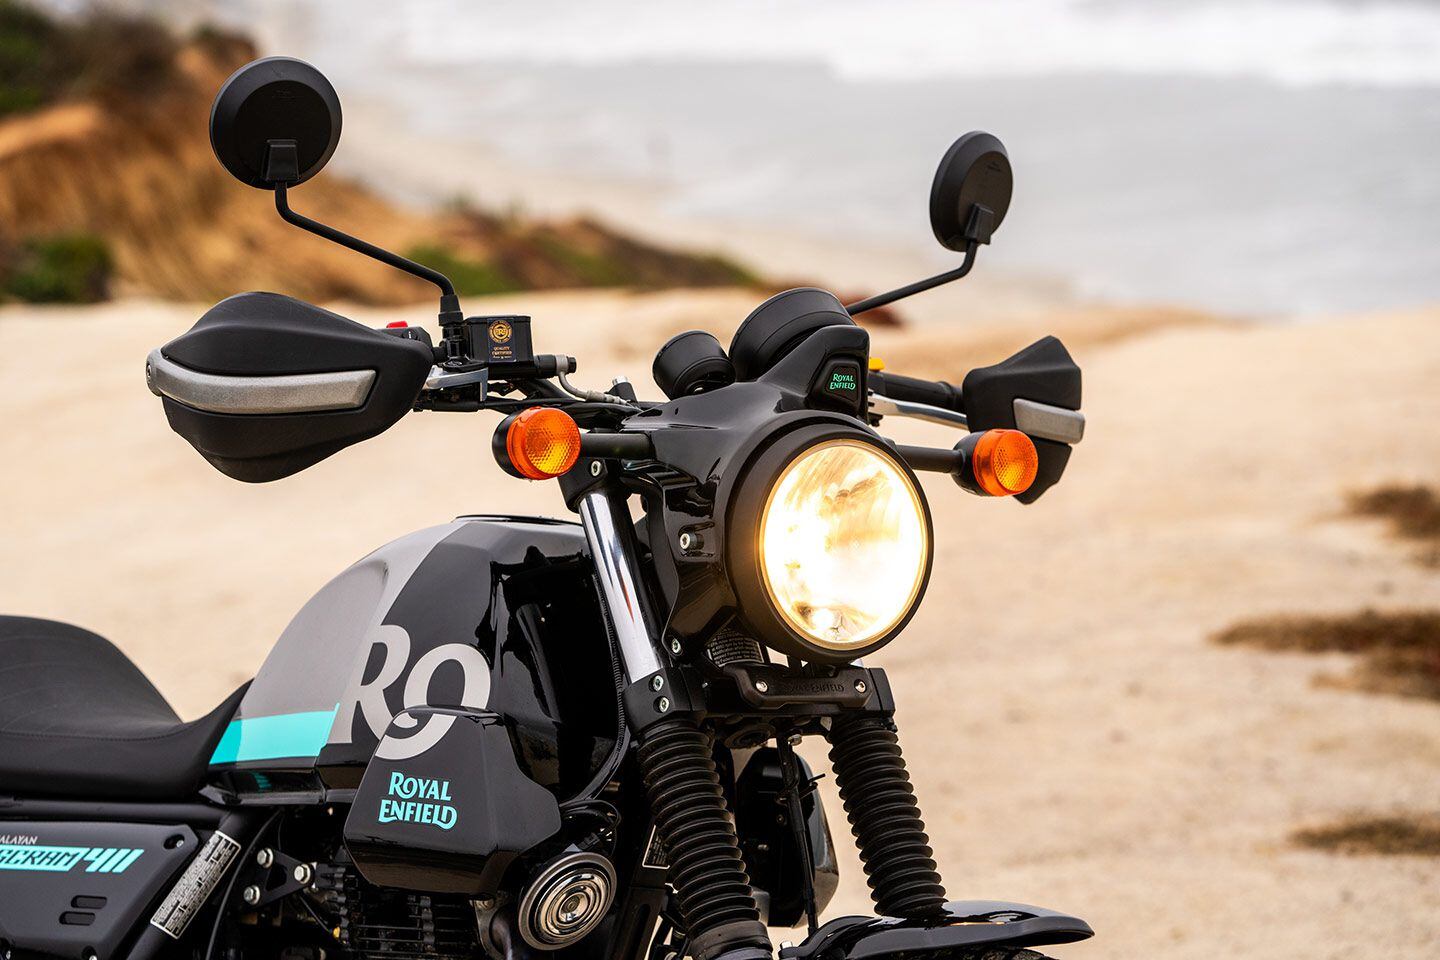 The Scram 411 employs a large-diameter halogen headlight that throws off a surprisingly deep swath of light during night rides (with high beam enabled).